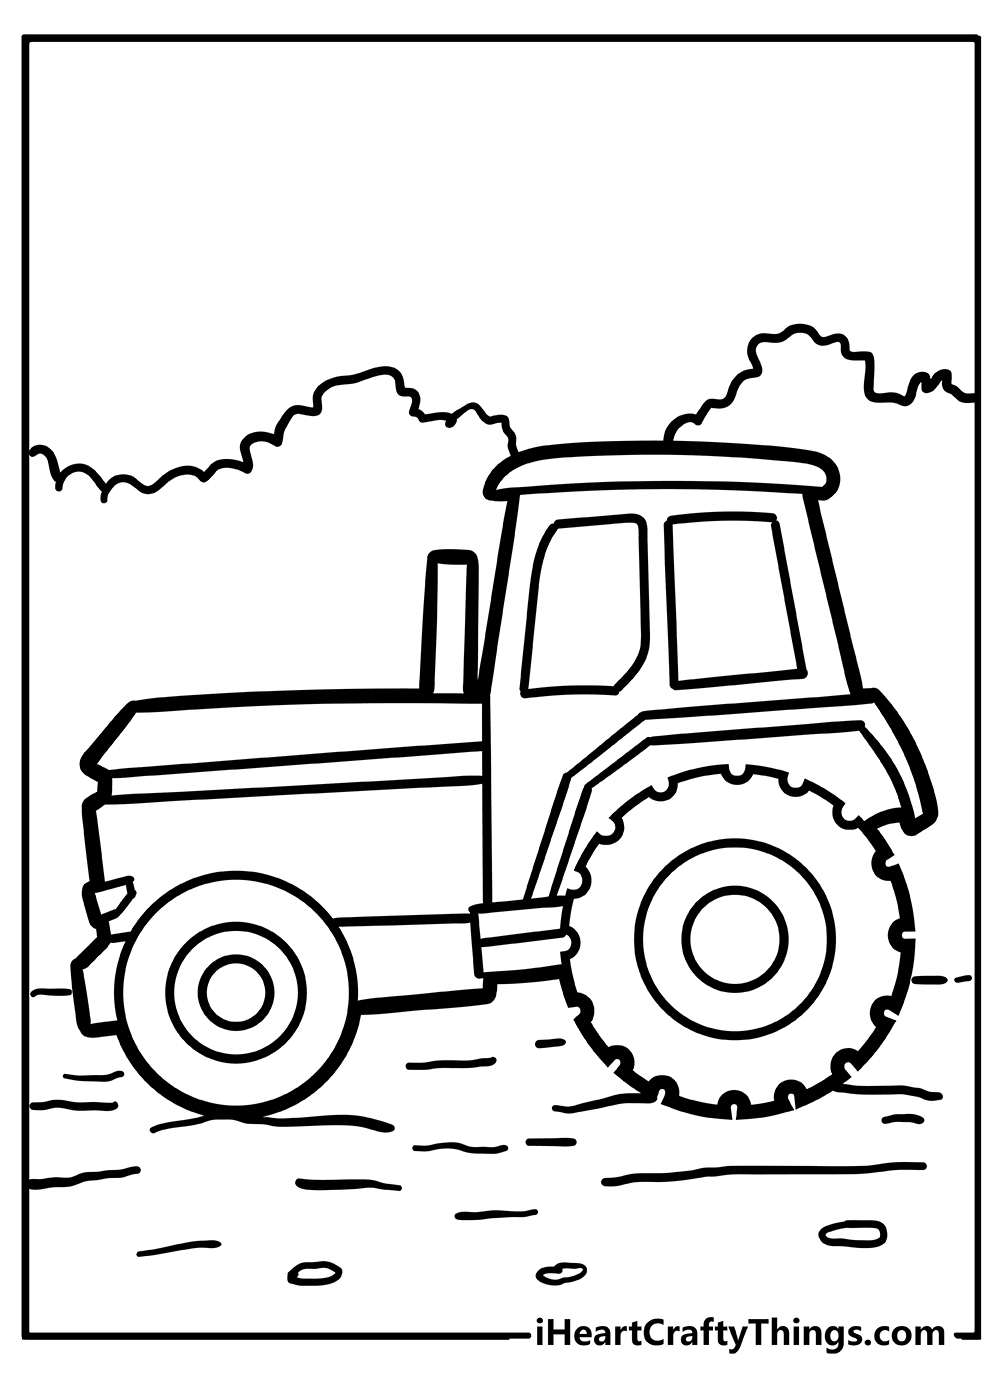 Tractor coloring pages free printables